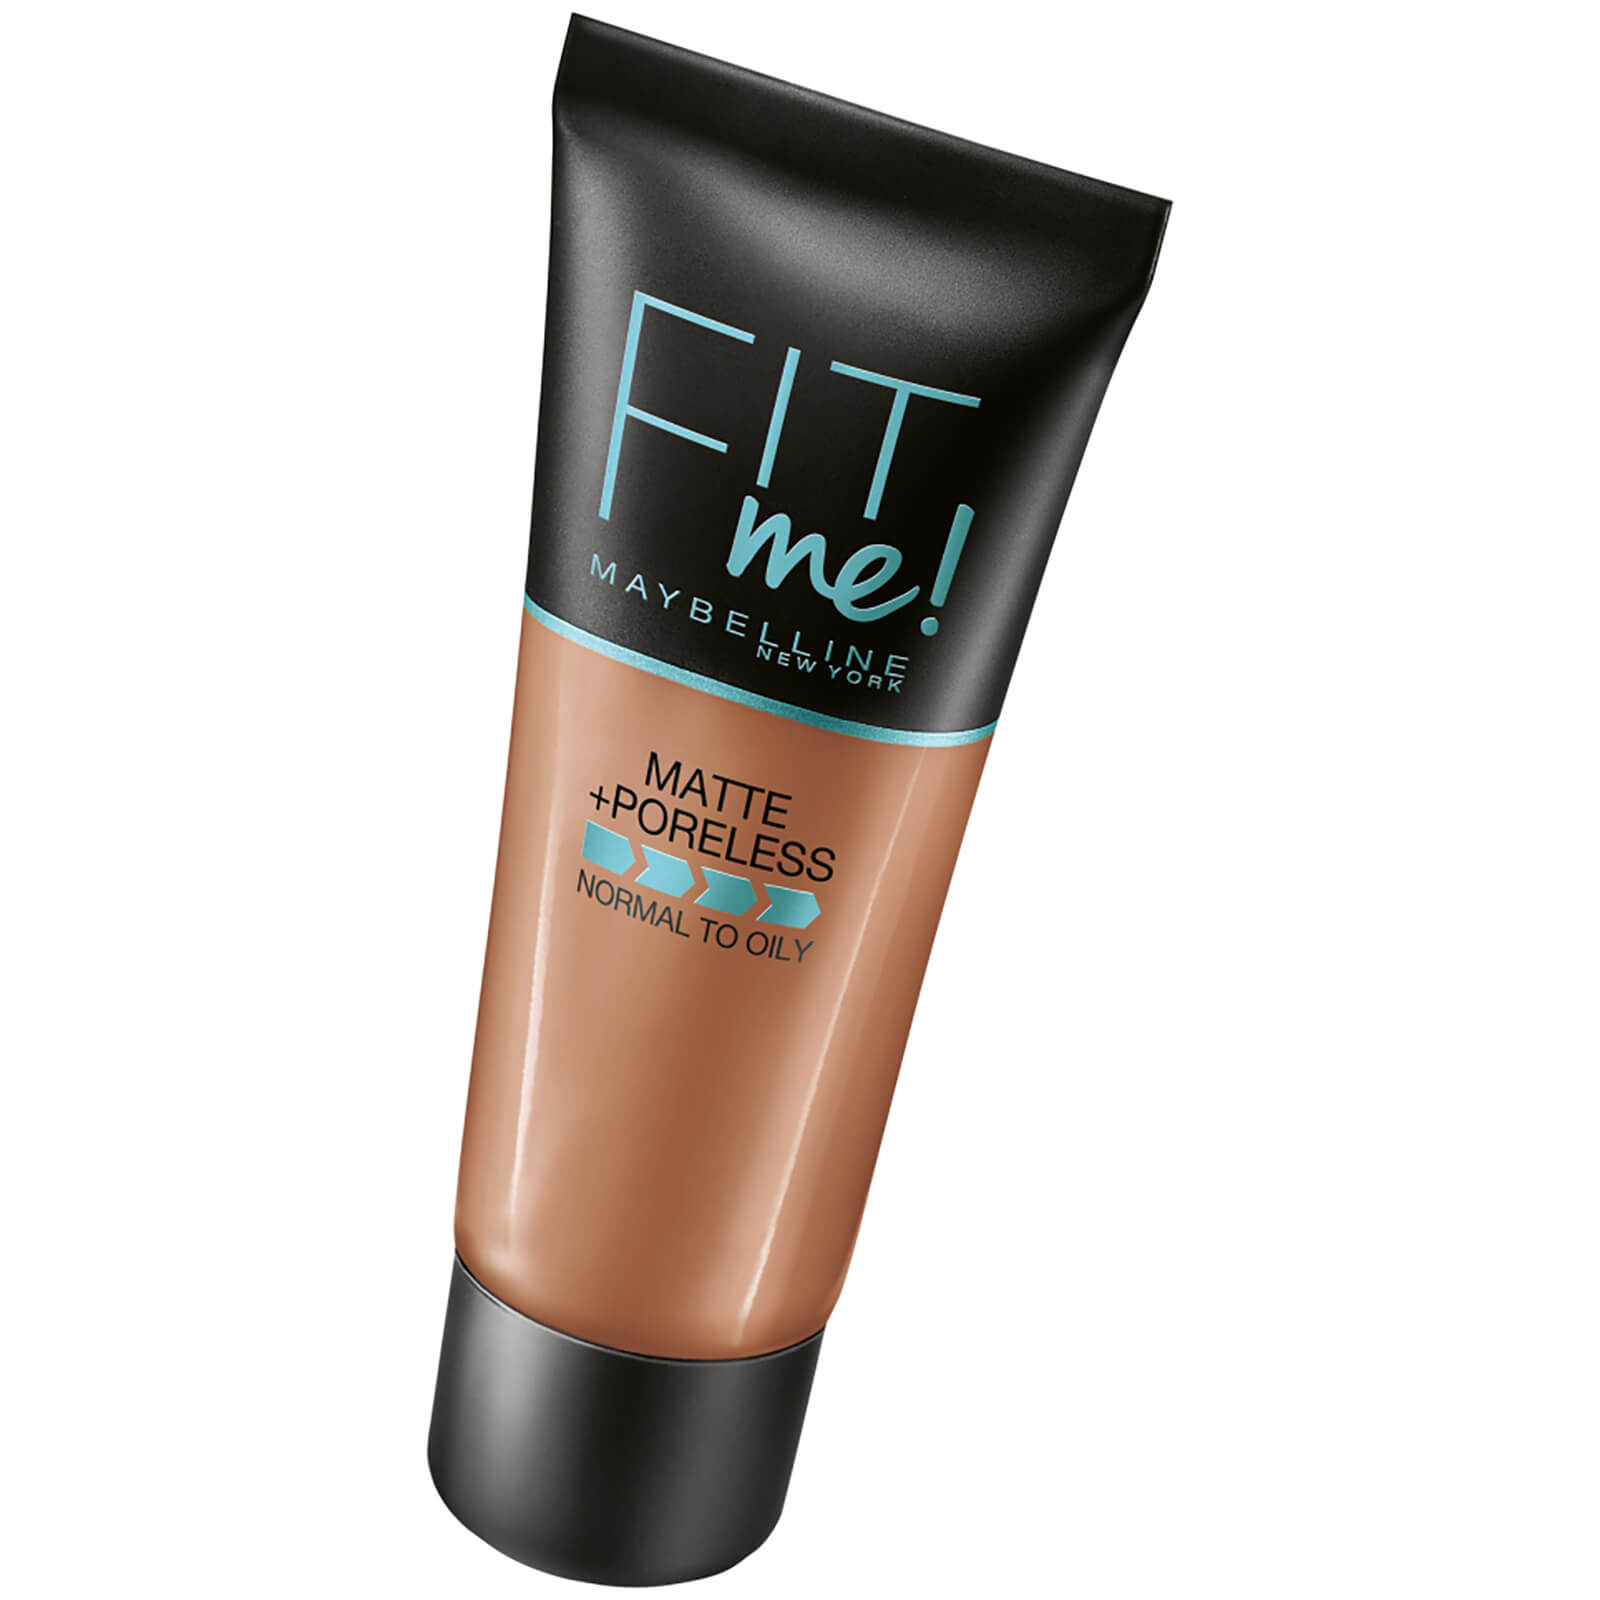 Maybelline Fit Me! Matte and Poreless Foundation 30ml (Various Shades) - 352 Truffle